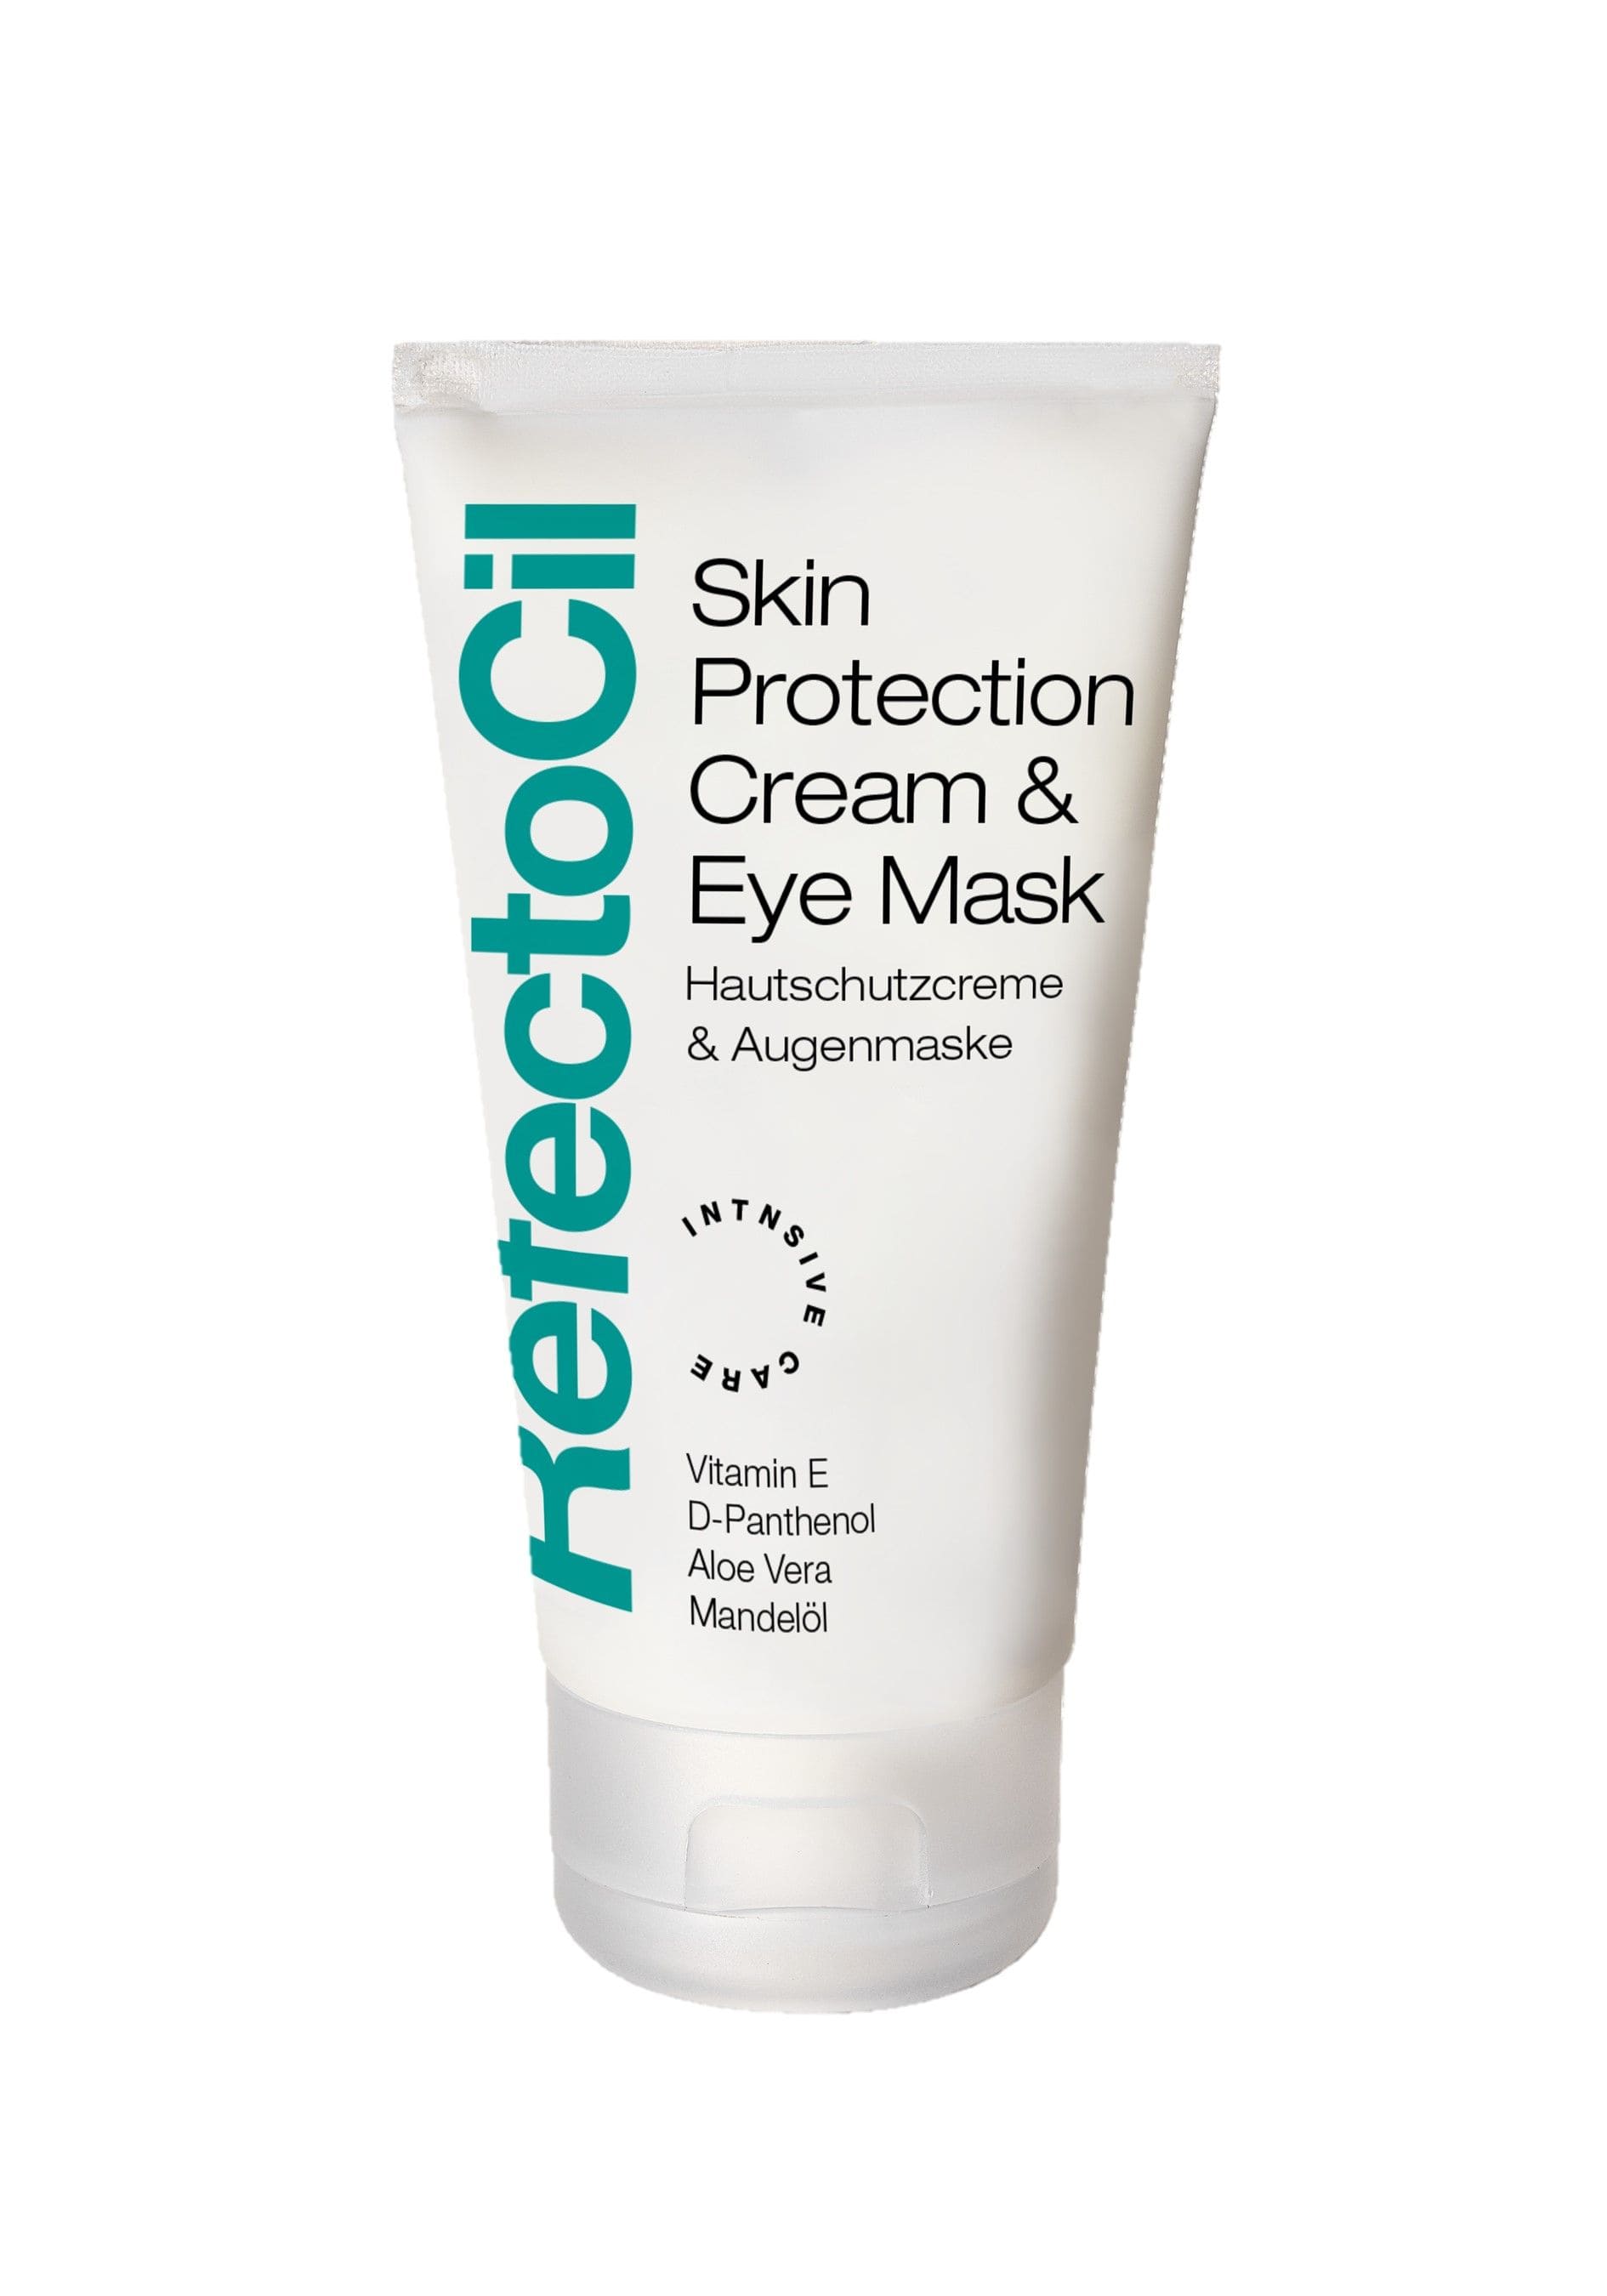 RefectoCil Skin Protection Cream and Eye Mask in a 75ml tube for pre and after lash tinting